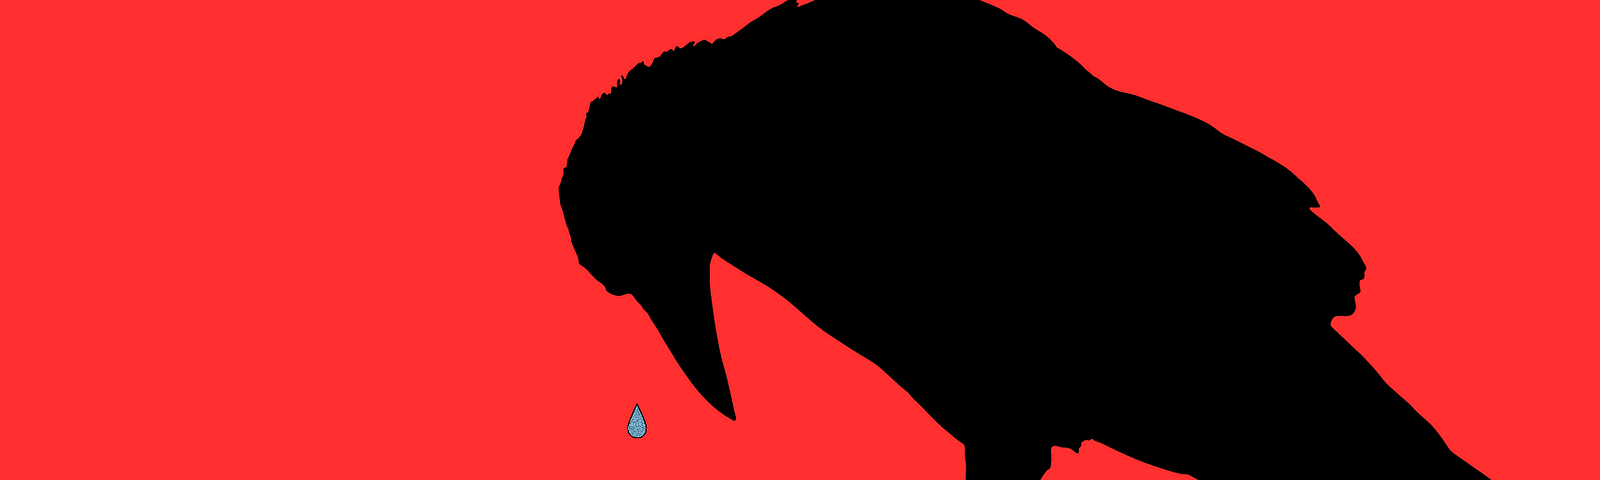 A silhouette of a crow on a red background with a single tear falling